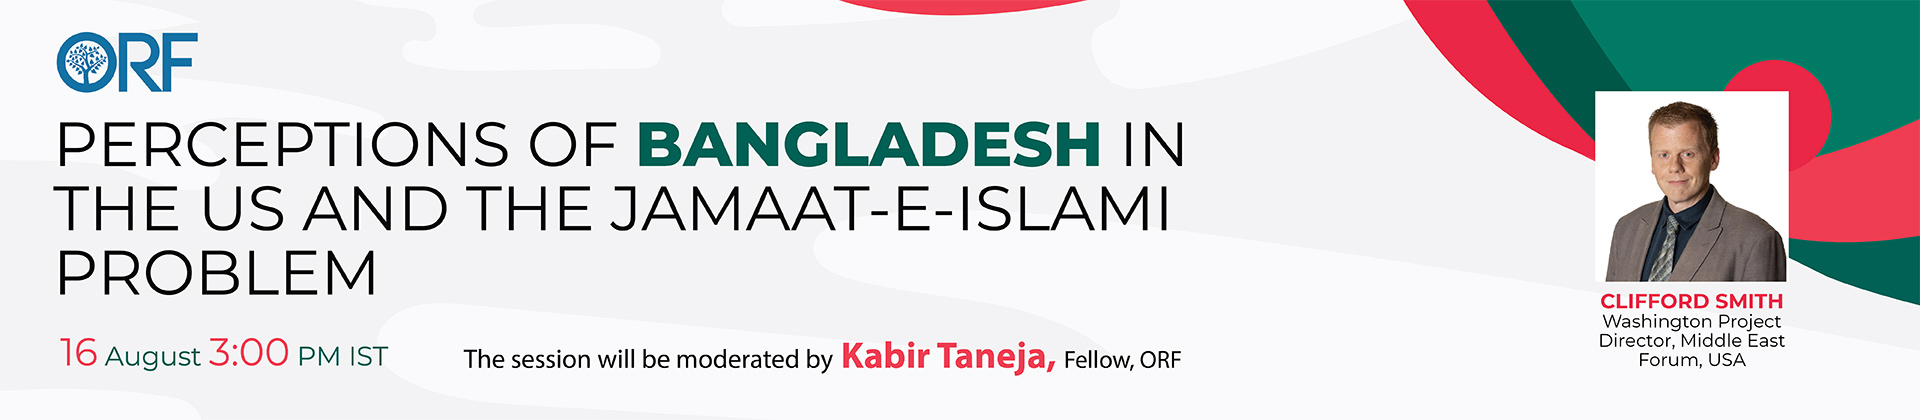 Perceptions of Bangladesh in the US and the Jamaat-e-Islami problem